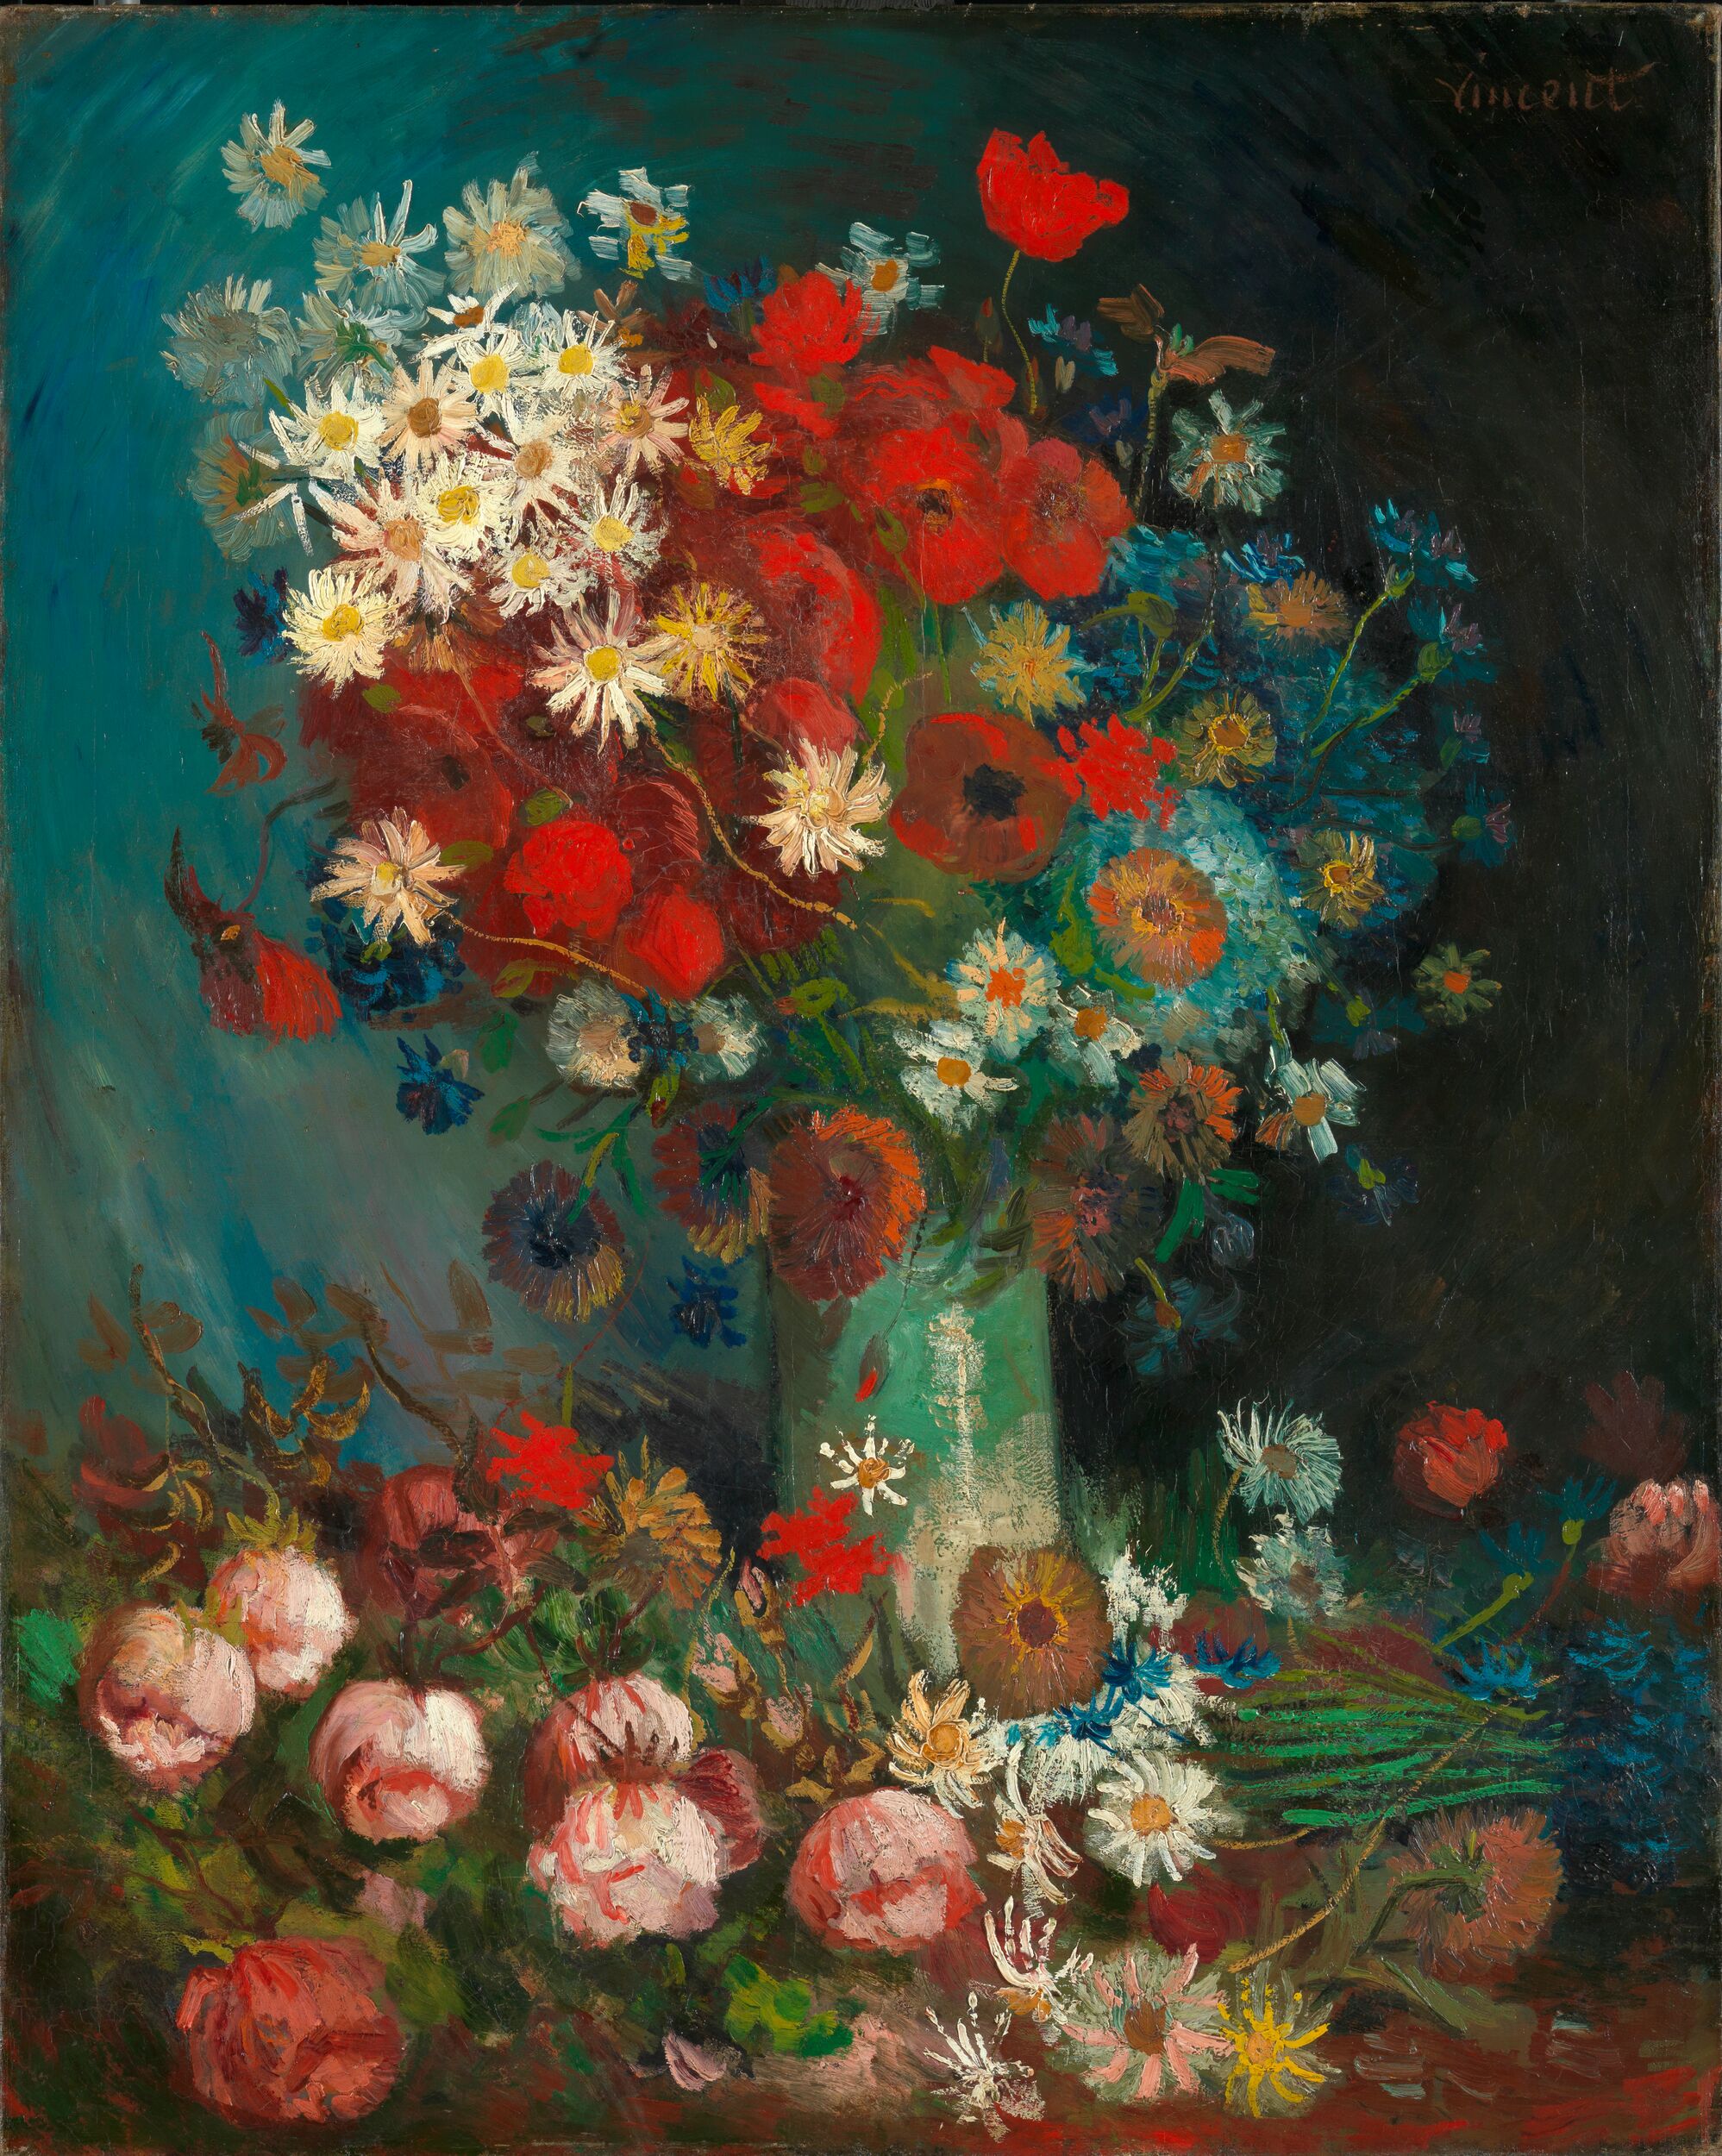 Still life with Meadow Flowers and Roses by Vincent van Gogh - 1886–1887 - 100 x 70 cm Kröller-Müller Museum